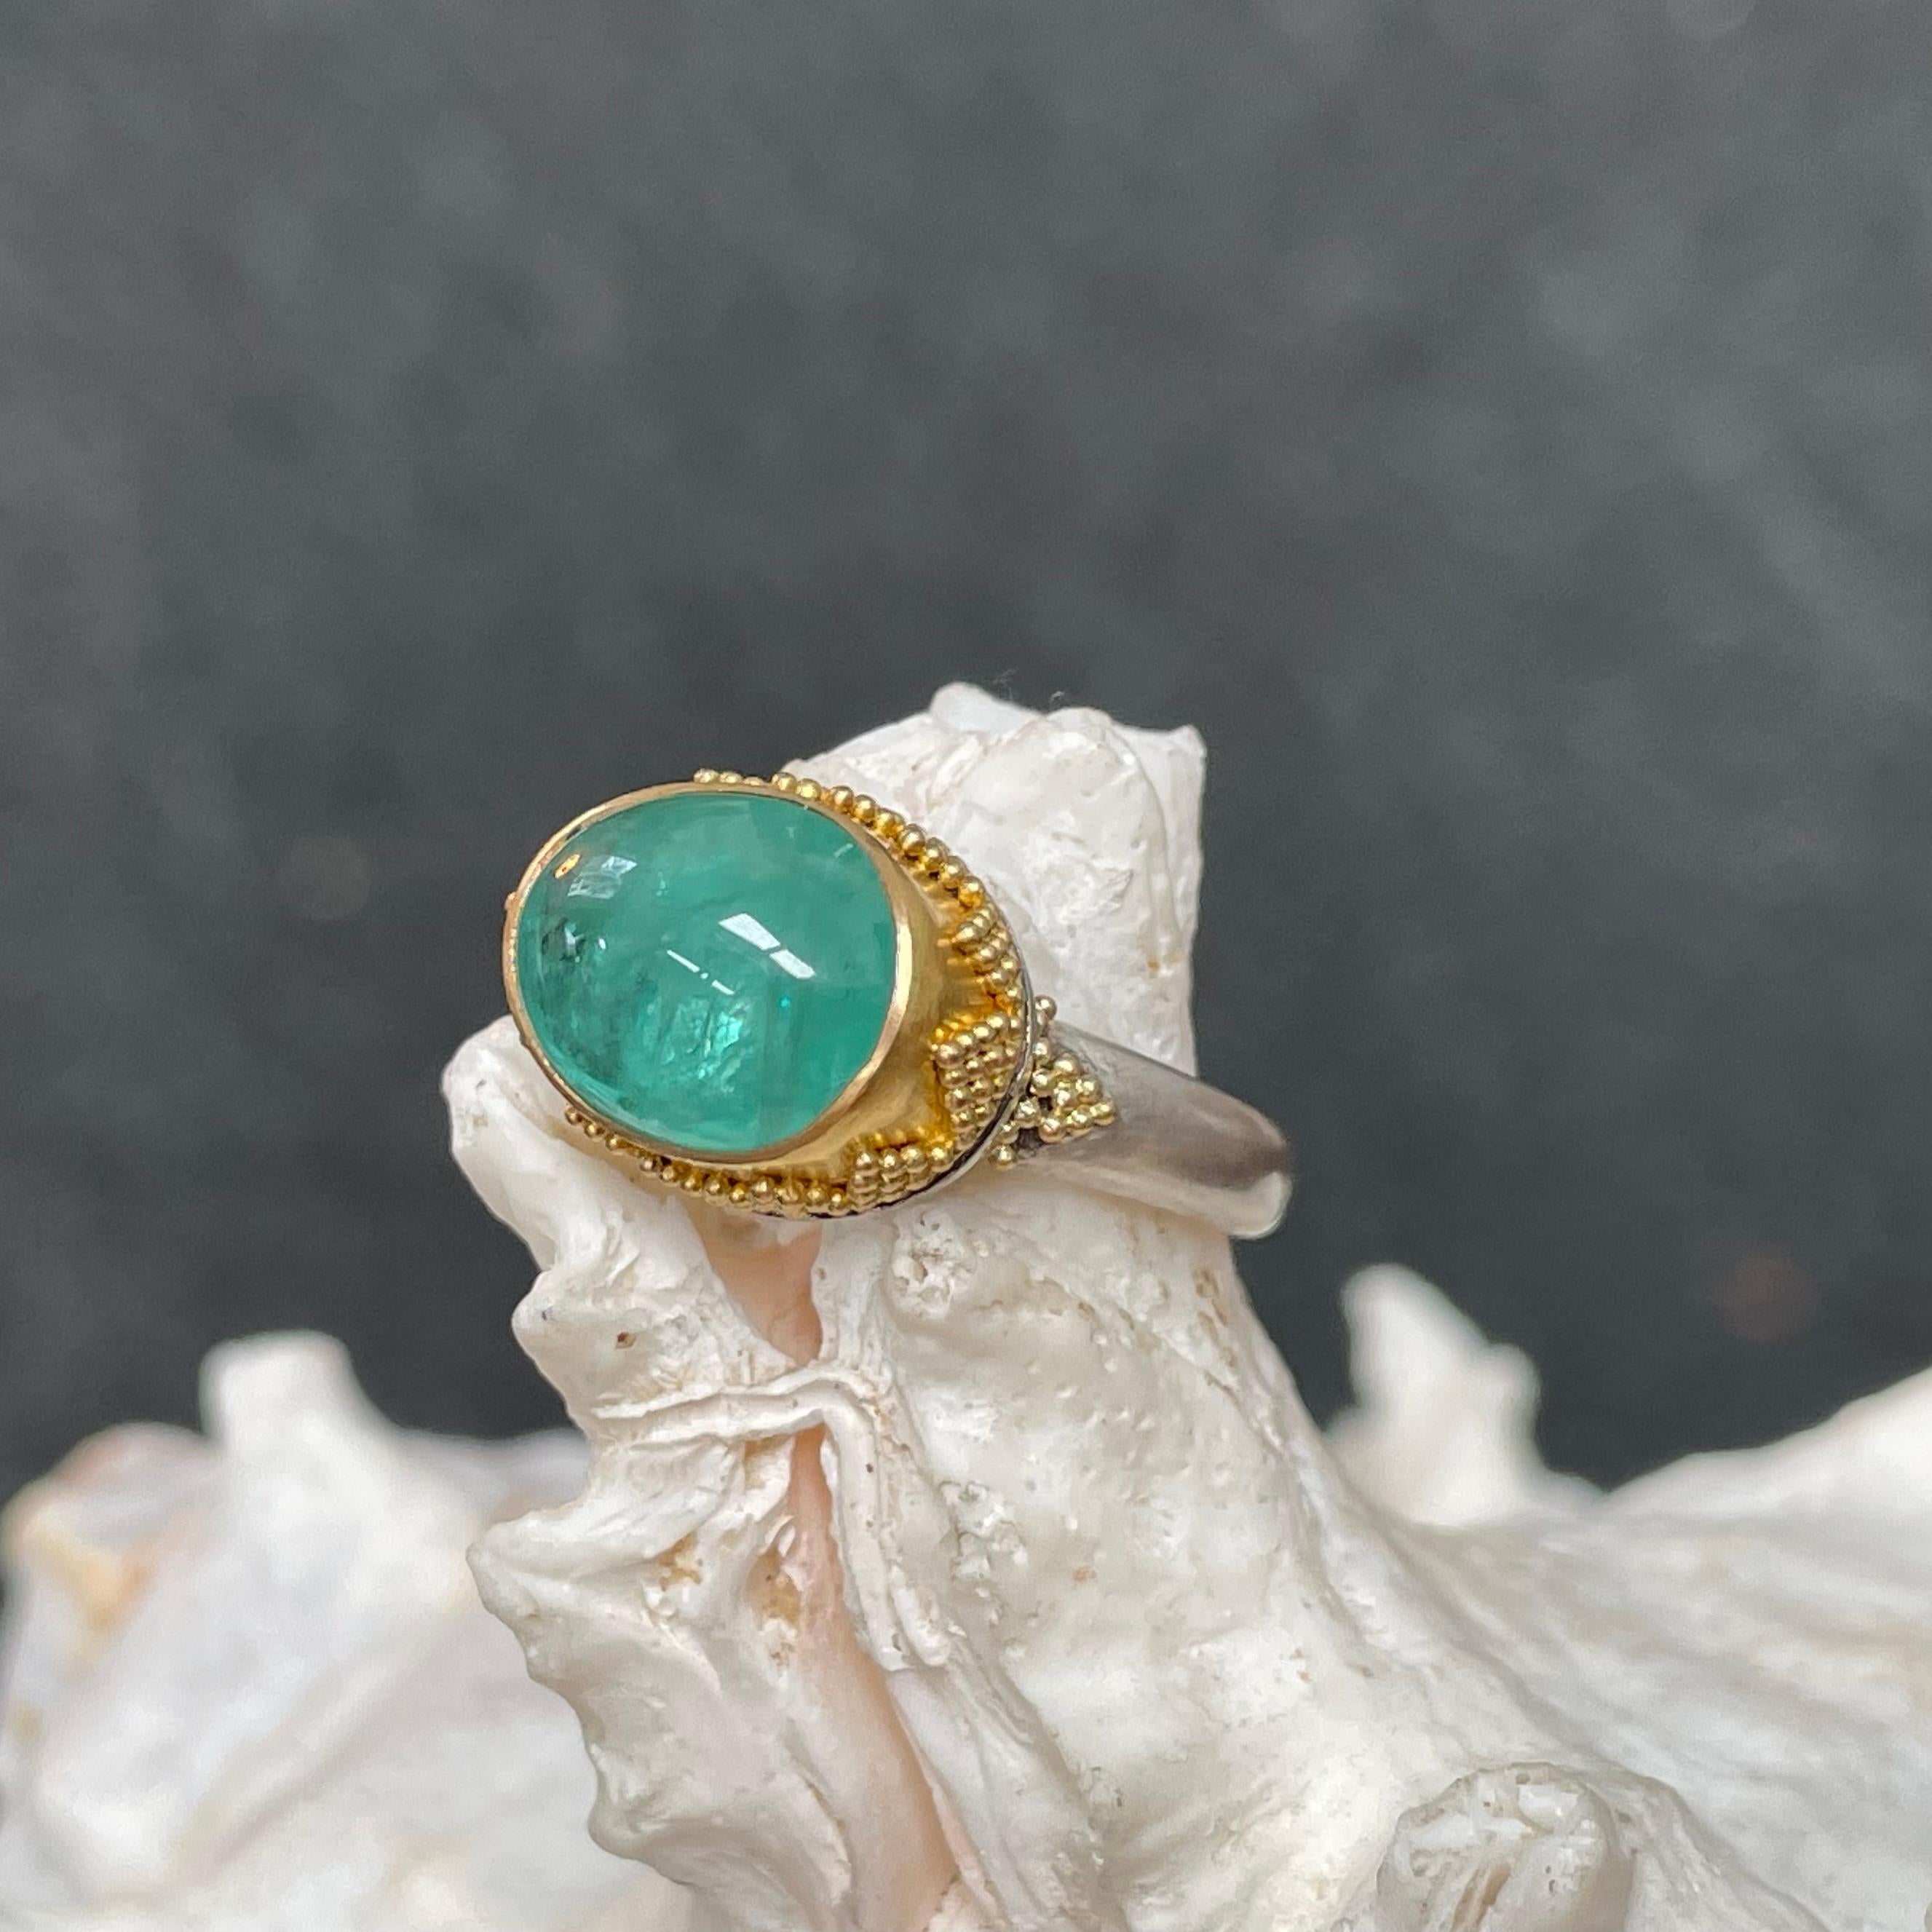 A beautiful 9 x 12 mm light green oval cabochon emerald is showcased within a cupped 22K bezel and geometrically granulated 